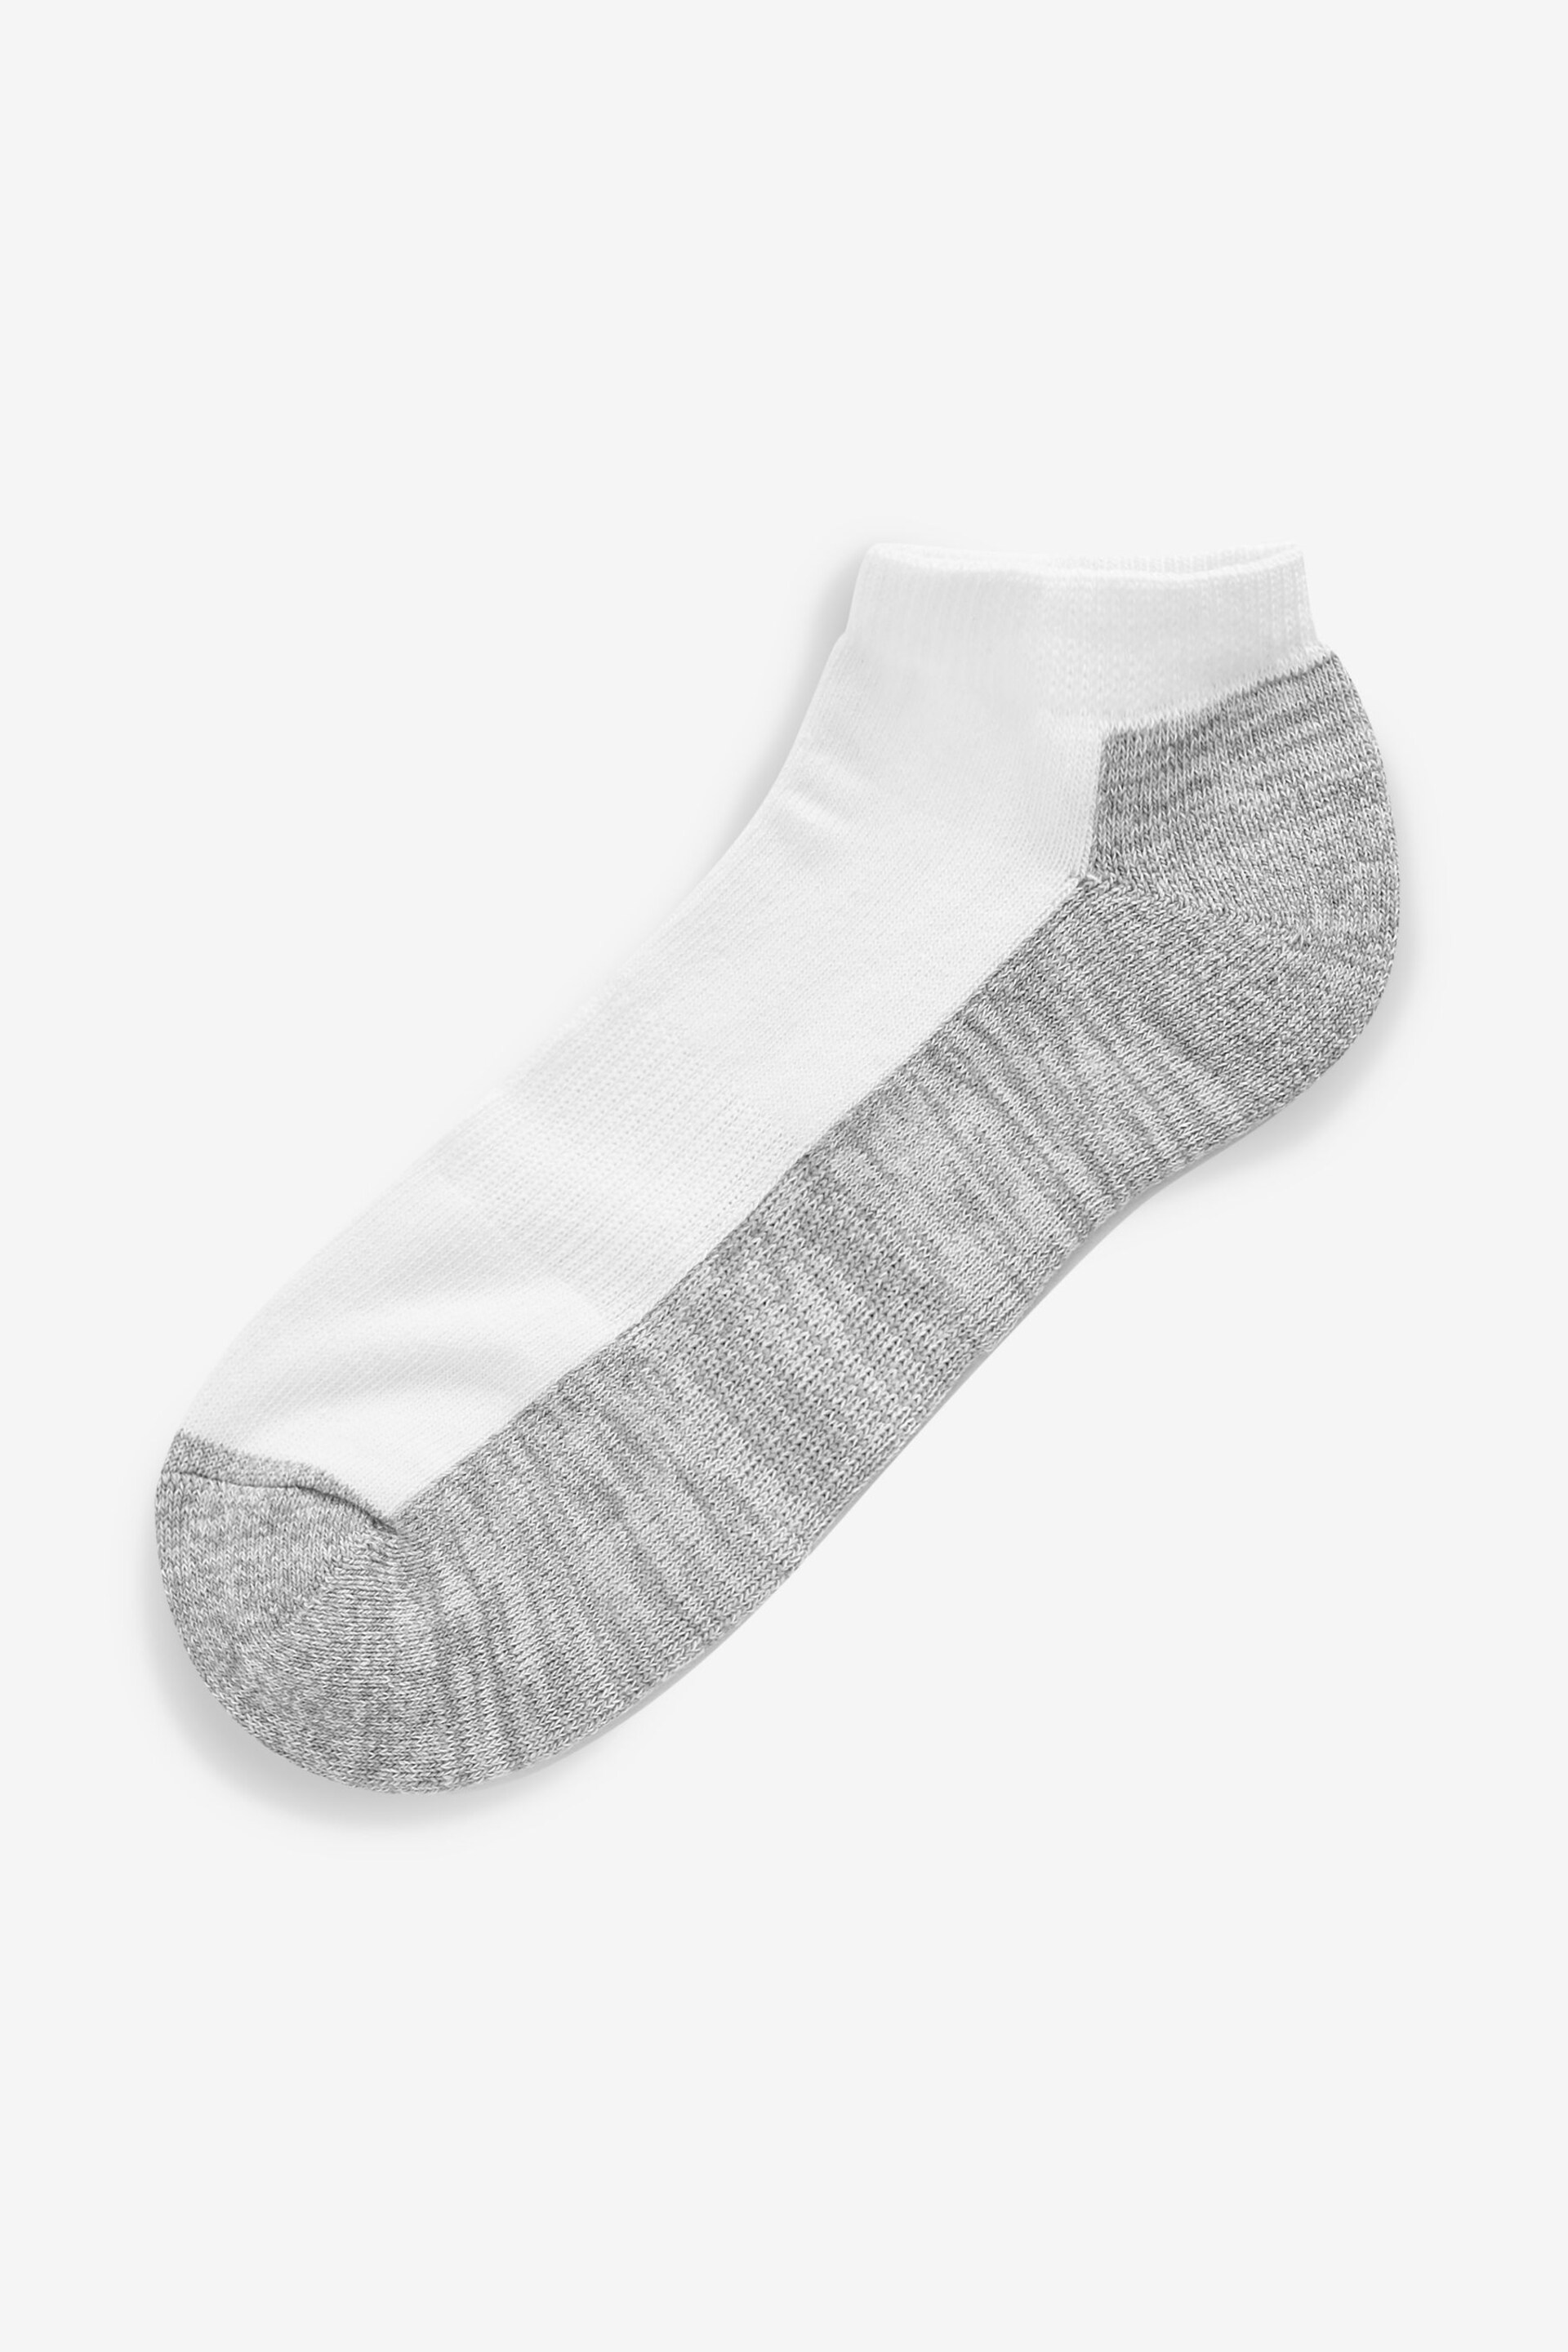 White/Grey 10 Pack Cushioned Trainers Socks - Image 2 of 6